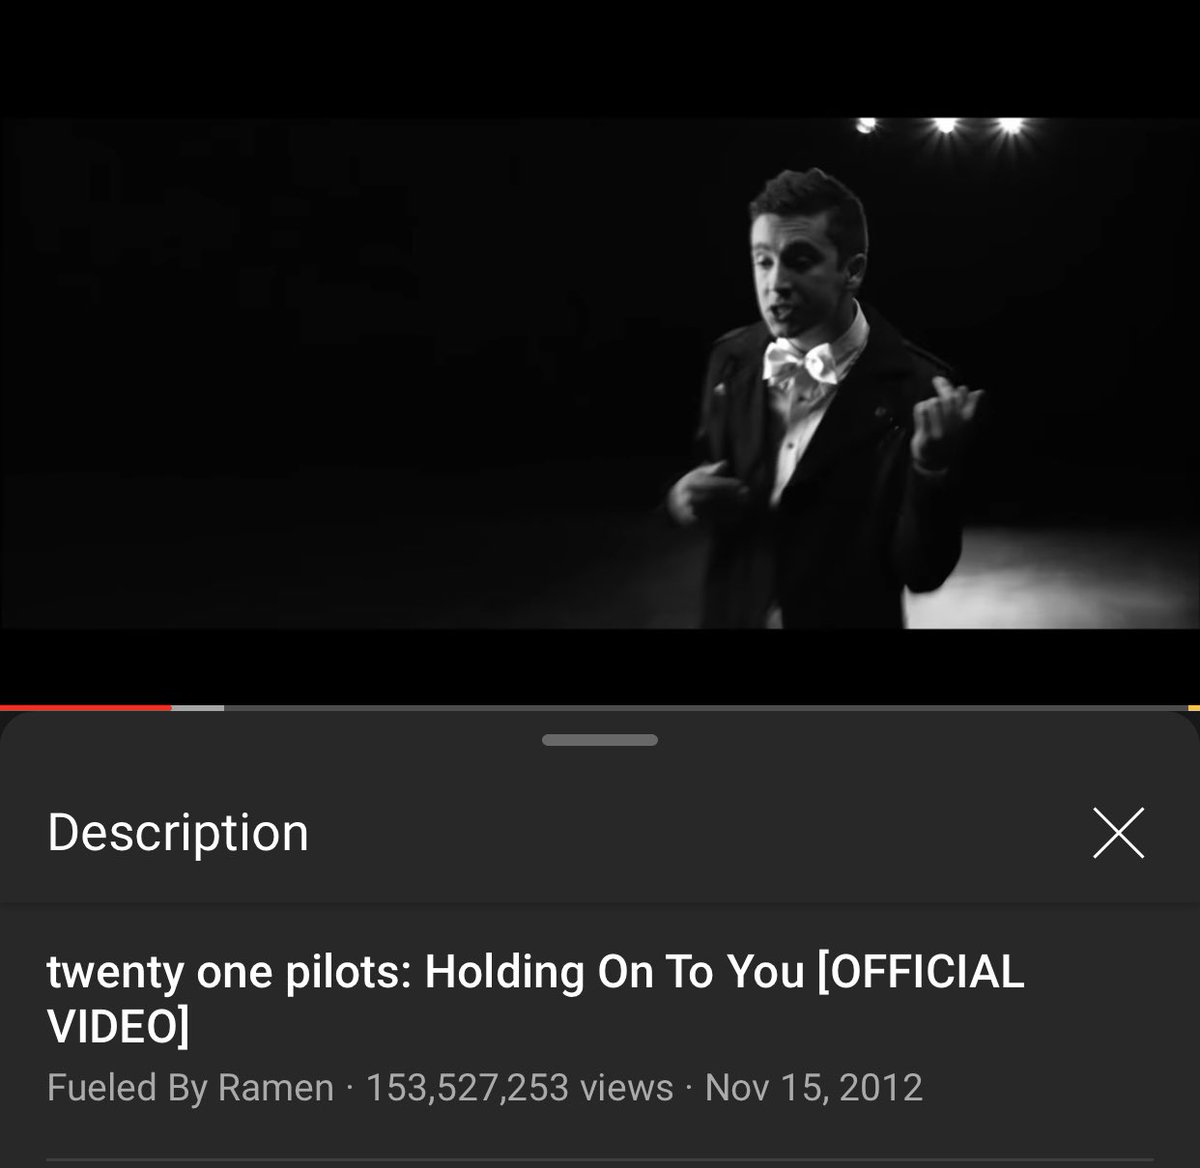 🎥| 8 years ago today, @twentyonepilots released the iconic Holding onto You music video